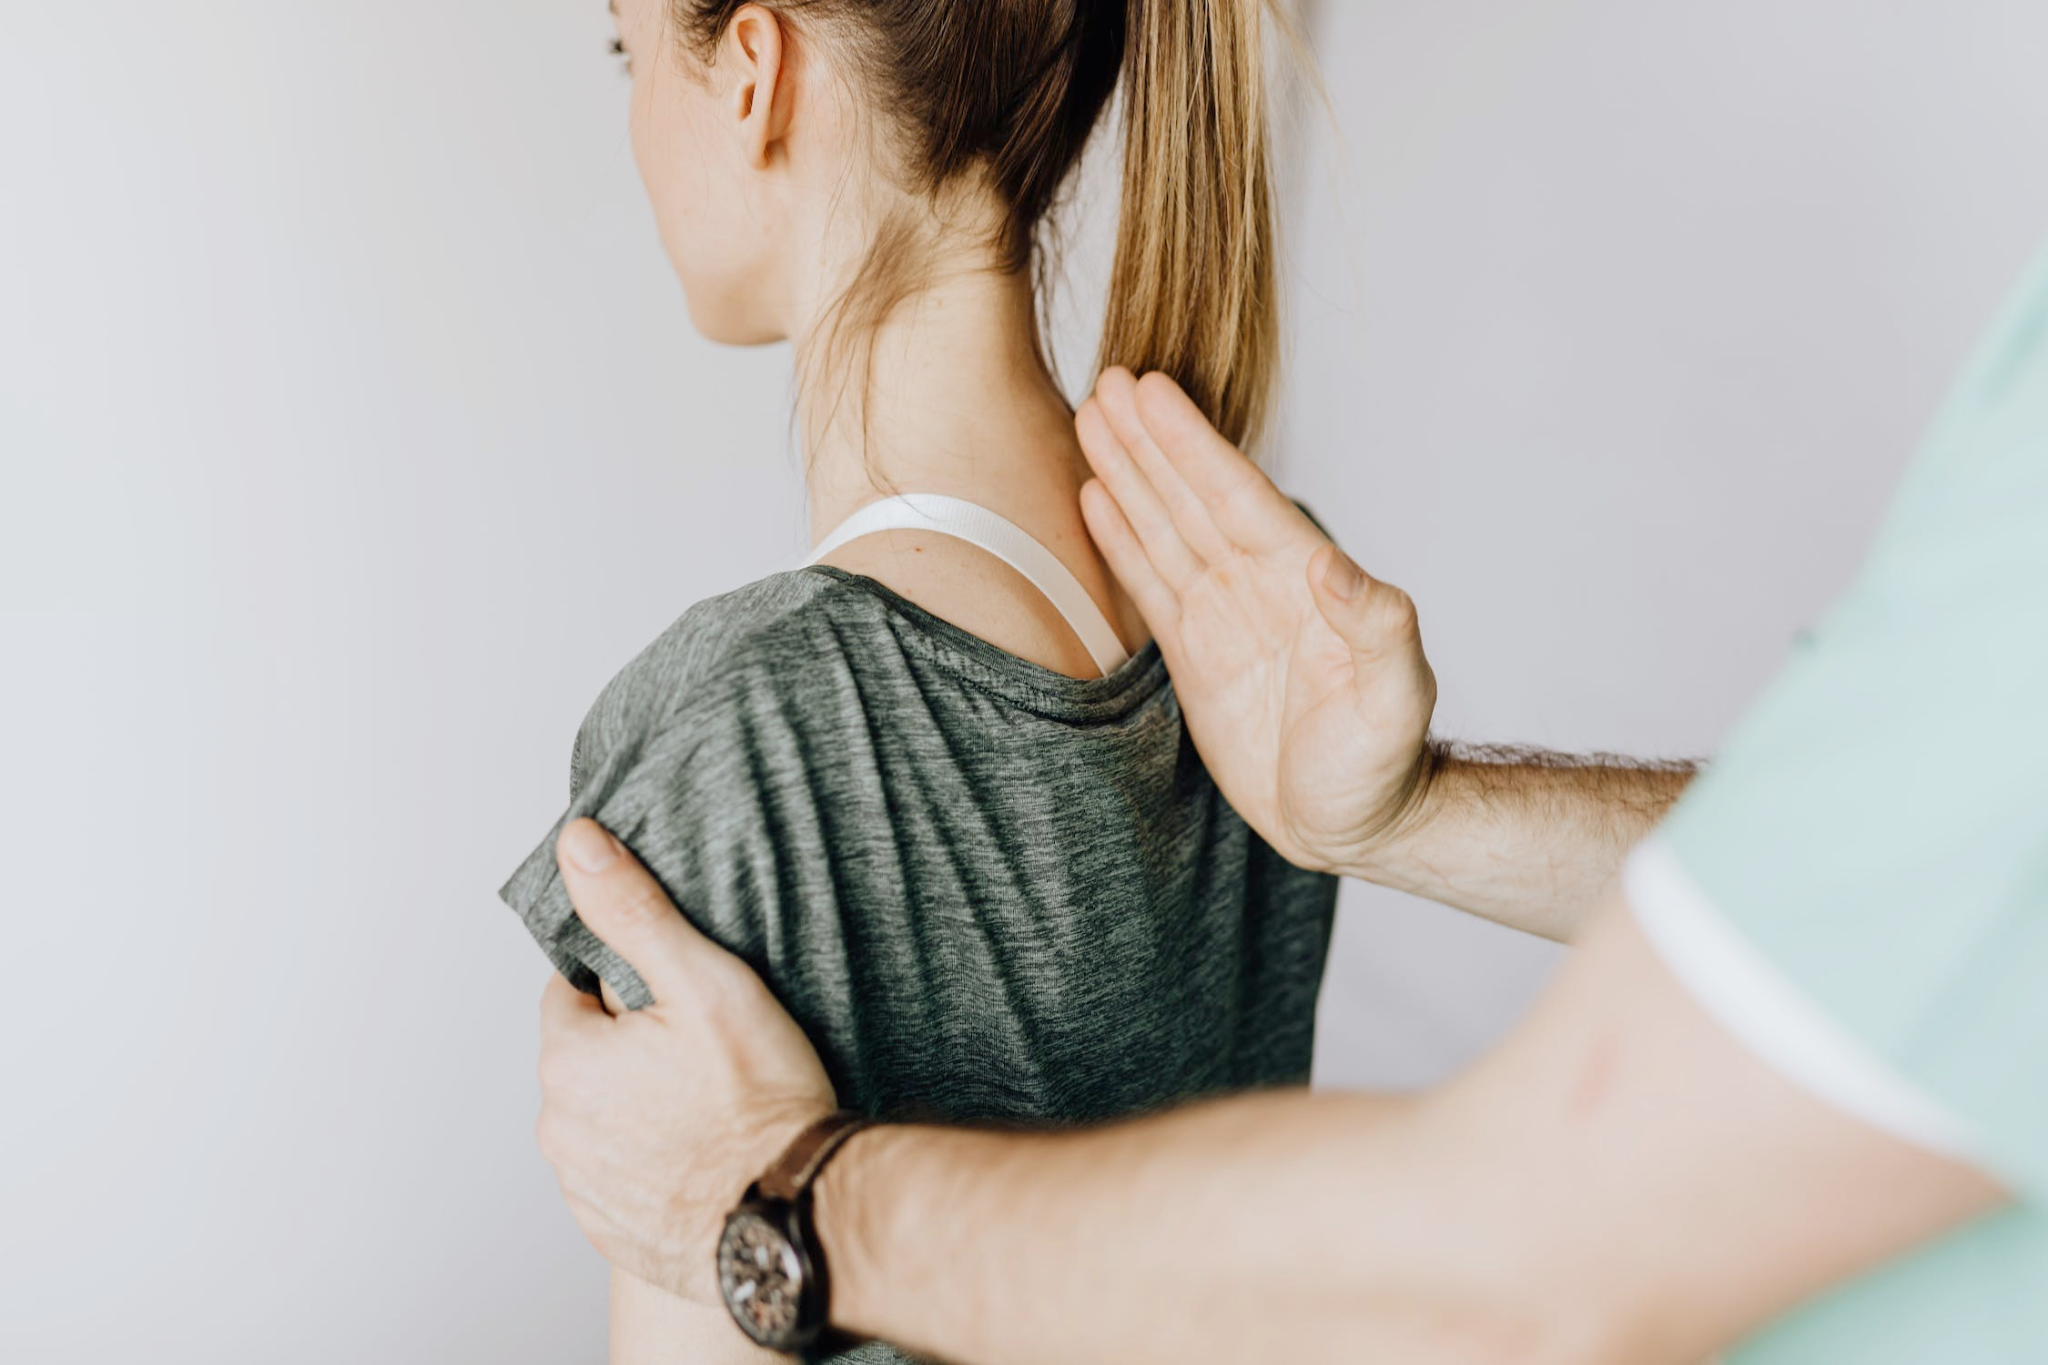 An image of a woman getting a back adjustment from a chiropractor